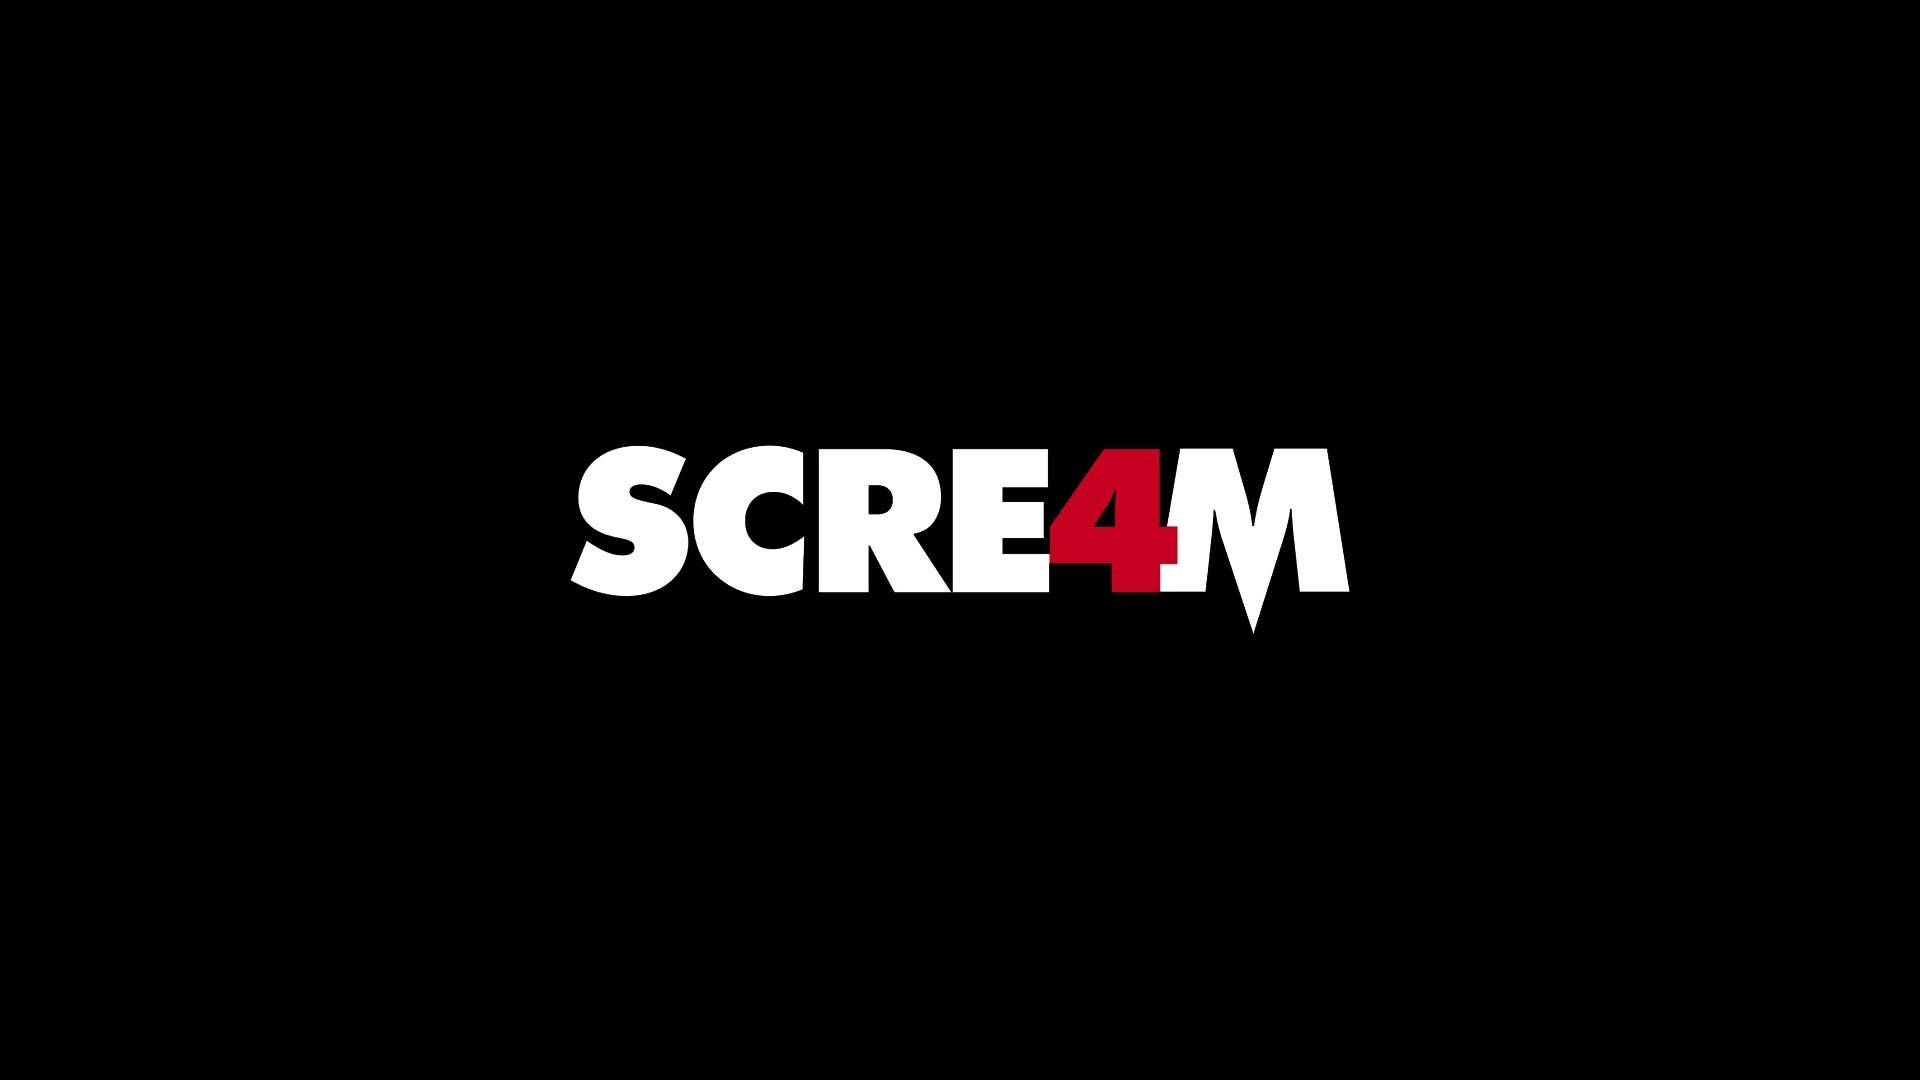 Scream 4 Title Poster Background